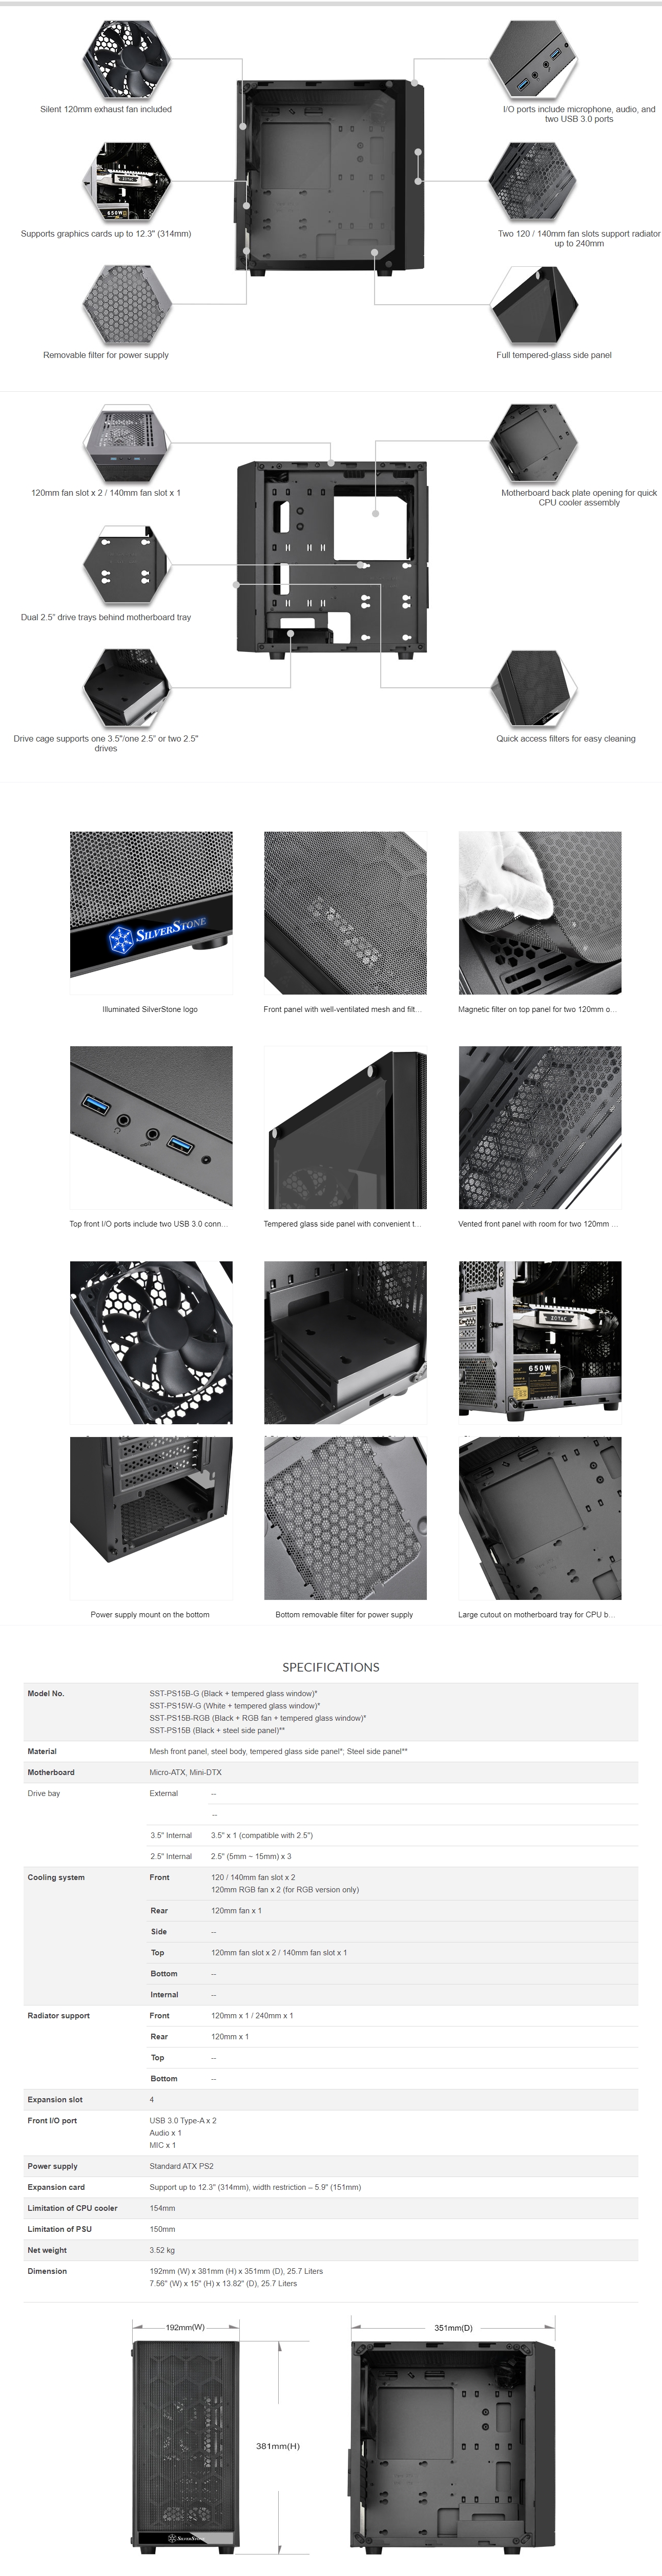 A large marketing image providing additional information about the product SilverStone PS15 Micro Tower Case - White - Additional alt info not provided